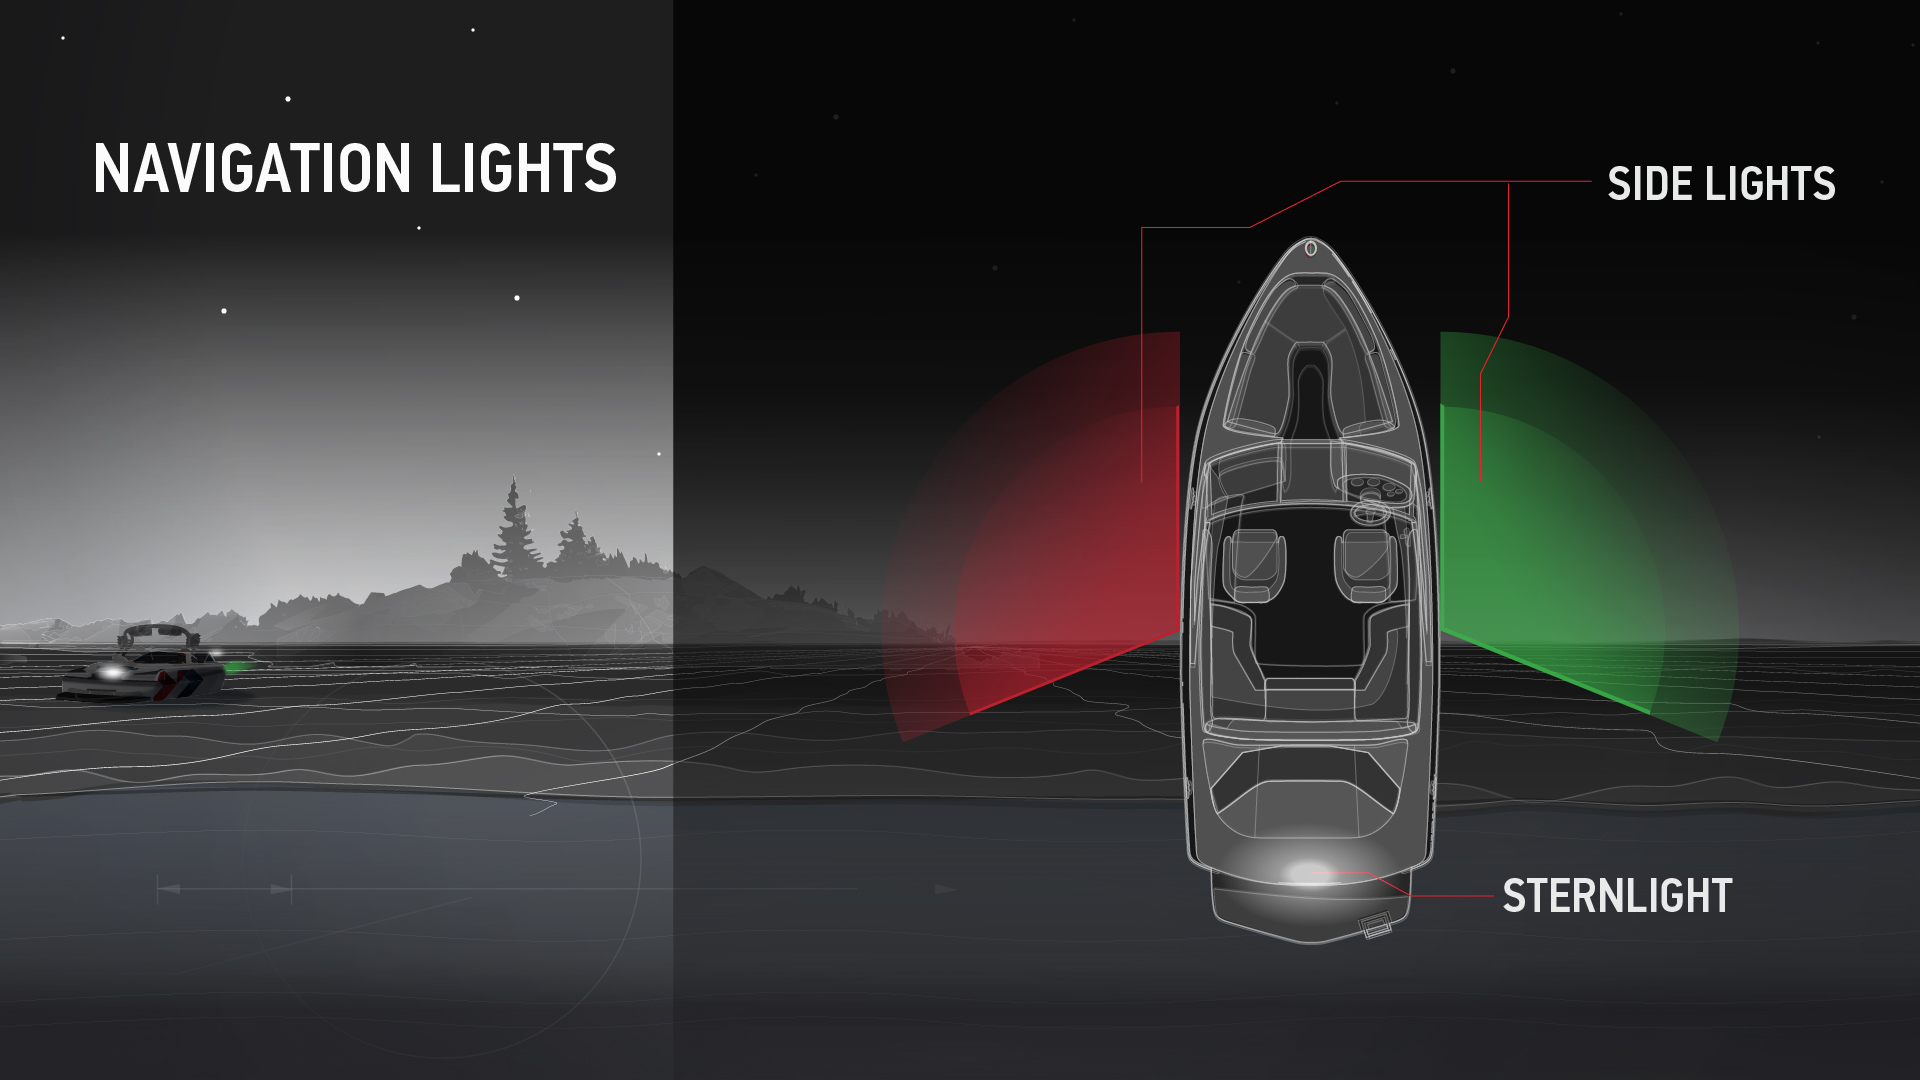 What the significance of red and green lights on a boat is and how to use them